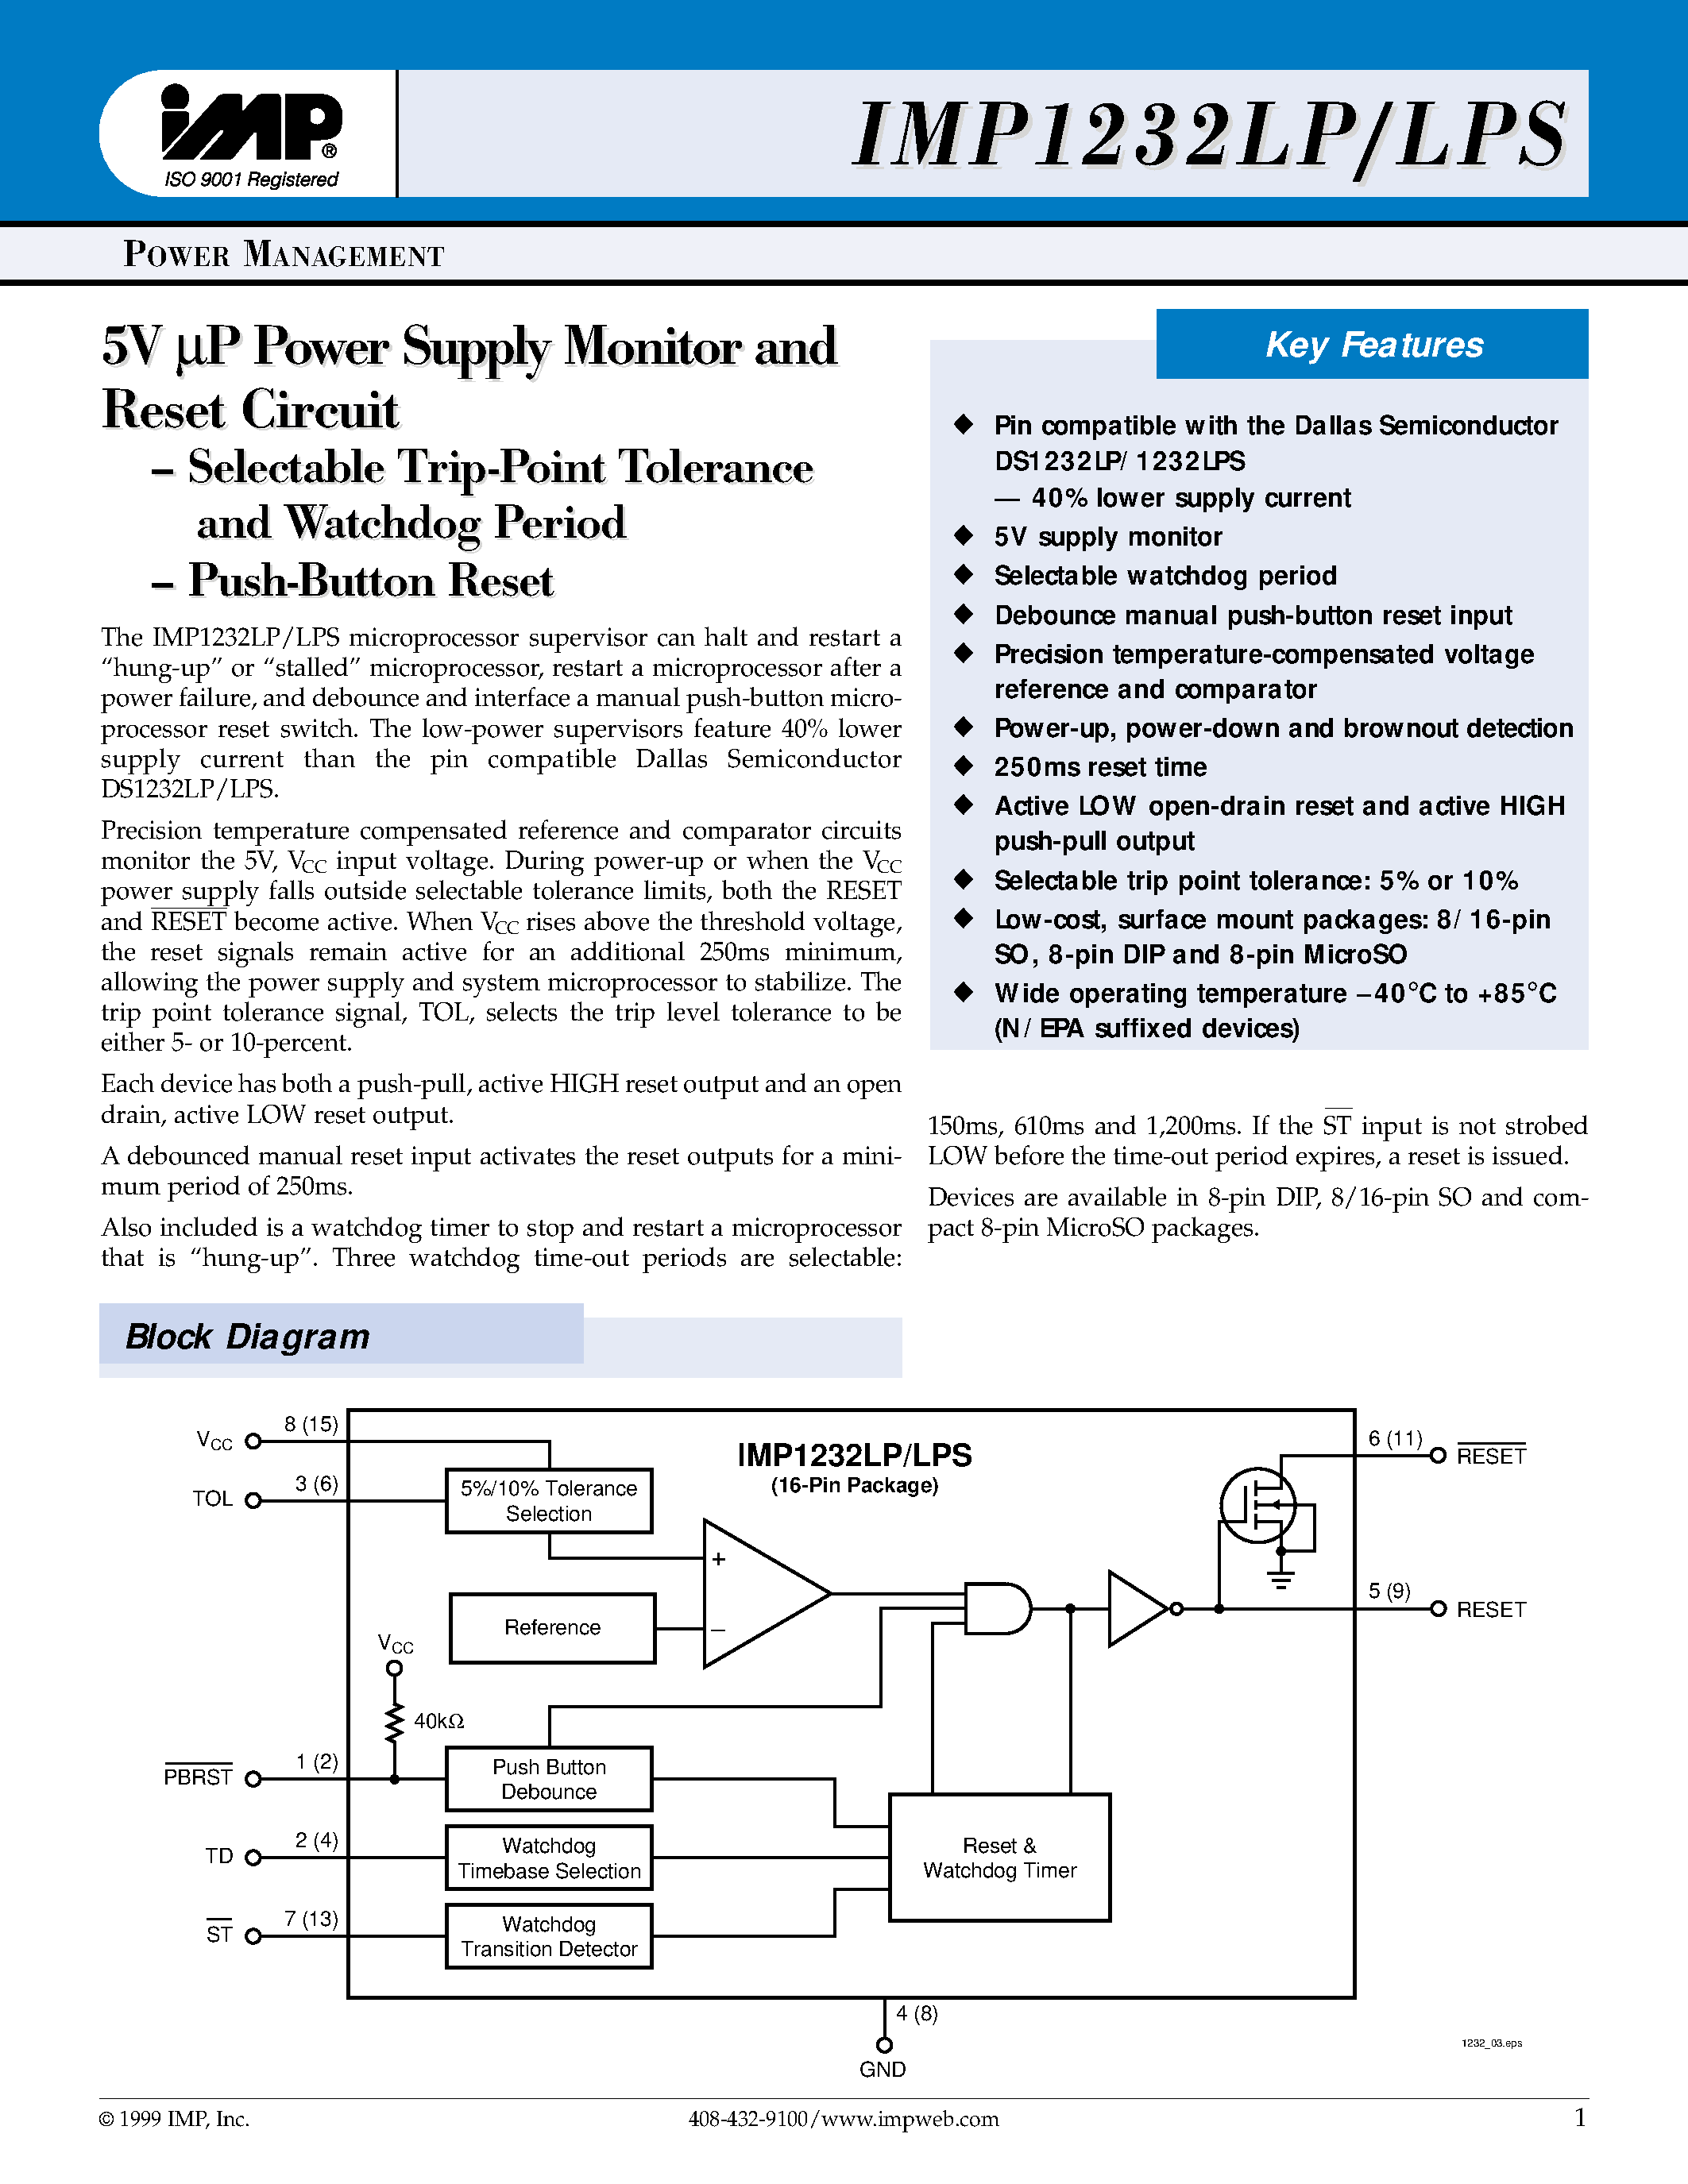 Datasheet IMP1232 - 5V P Power Suppl er Supply Monit y Monitor and or and Reset Cir eset Circuit page 1